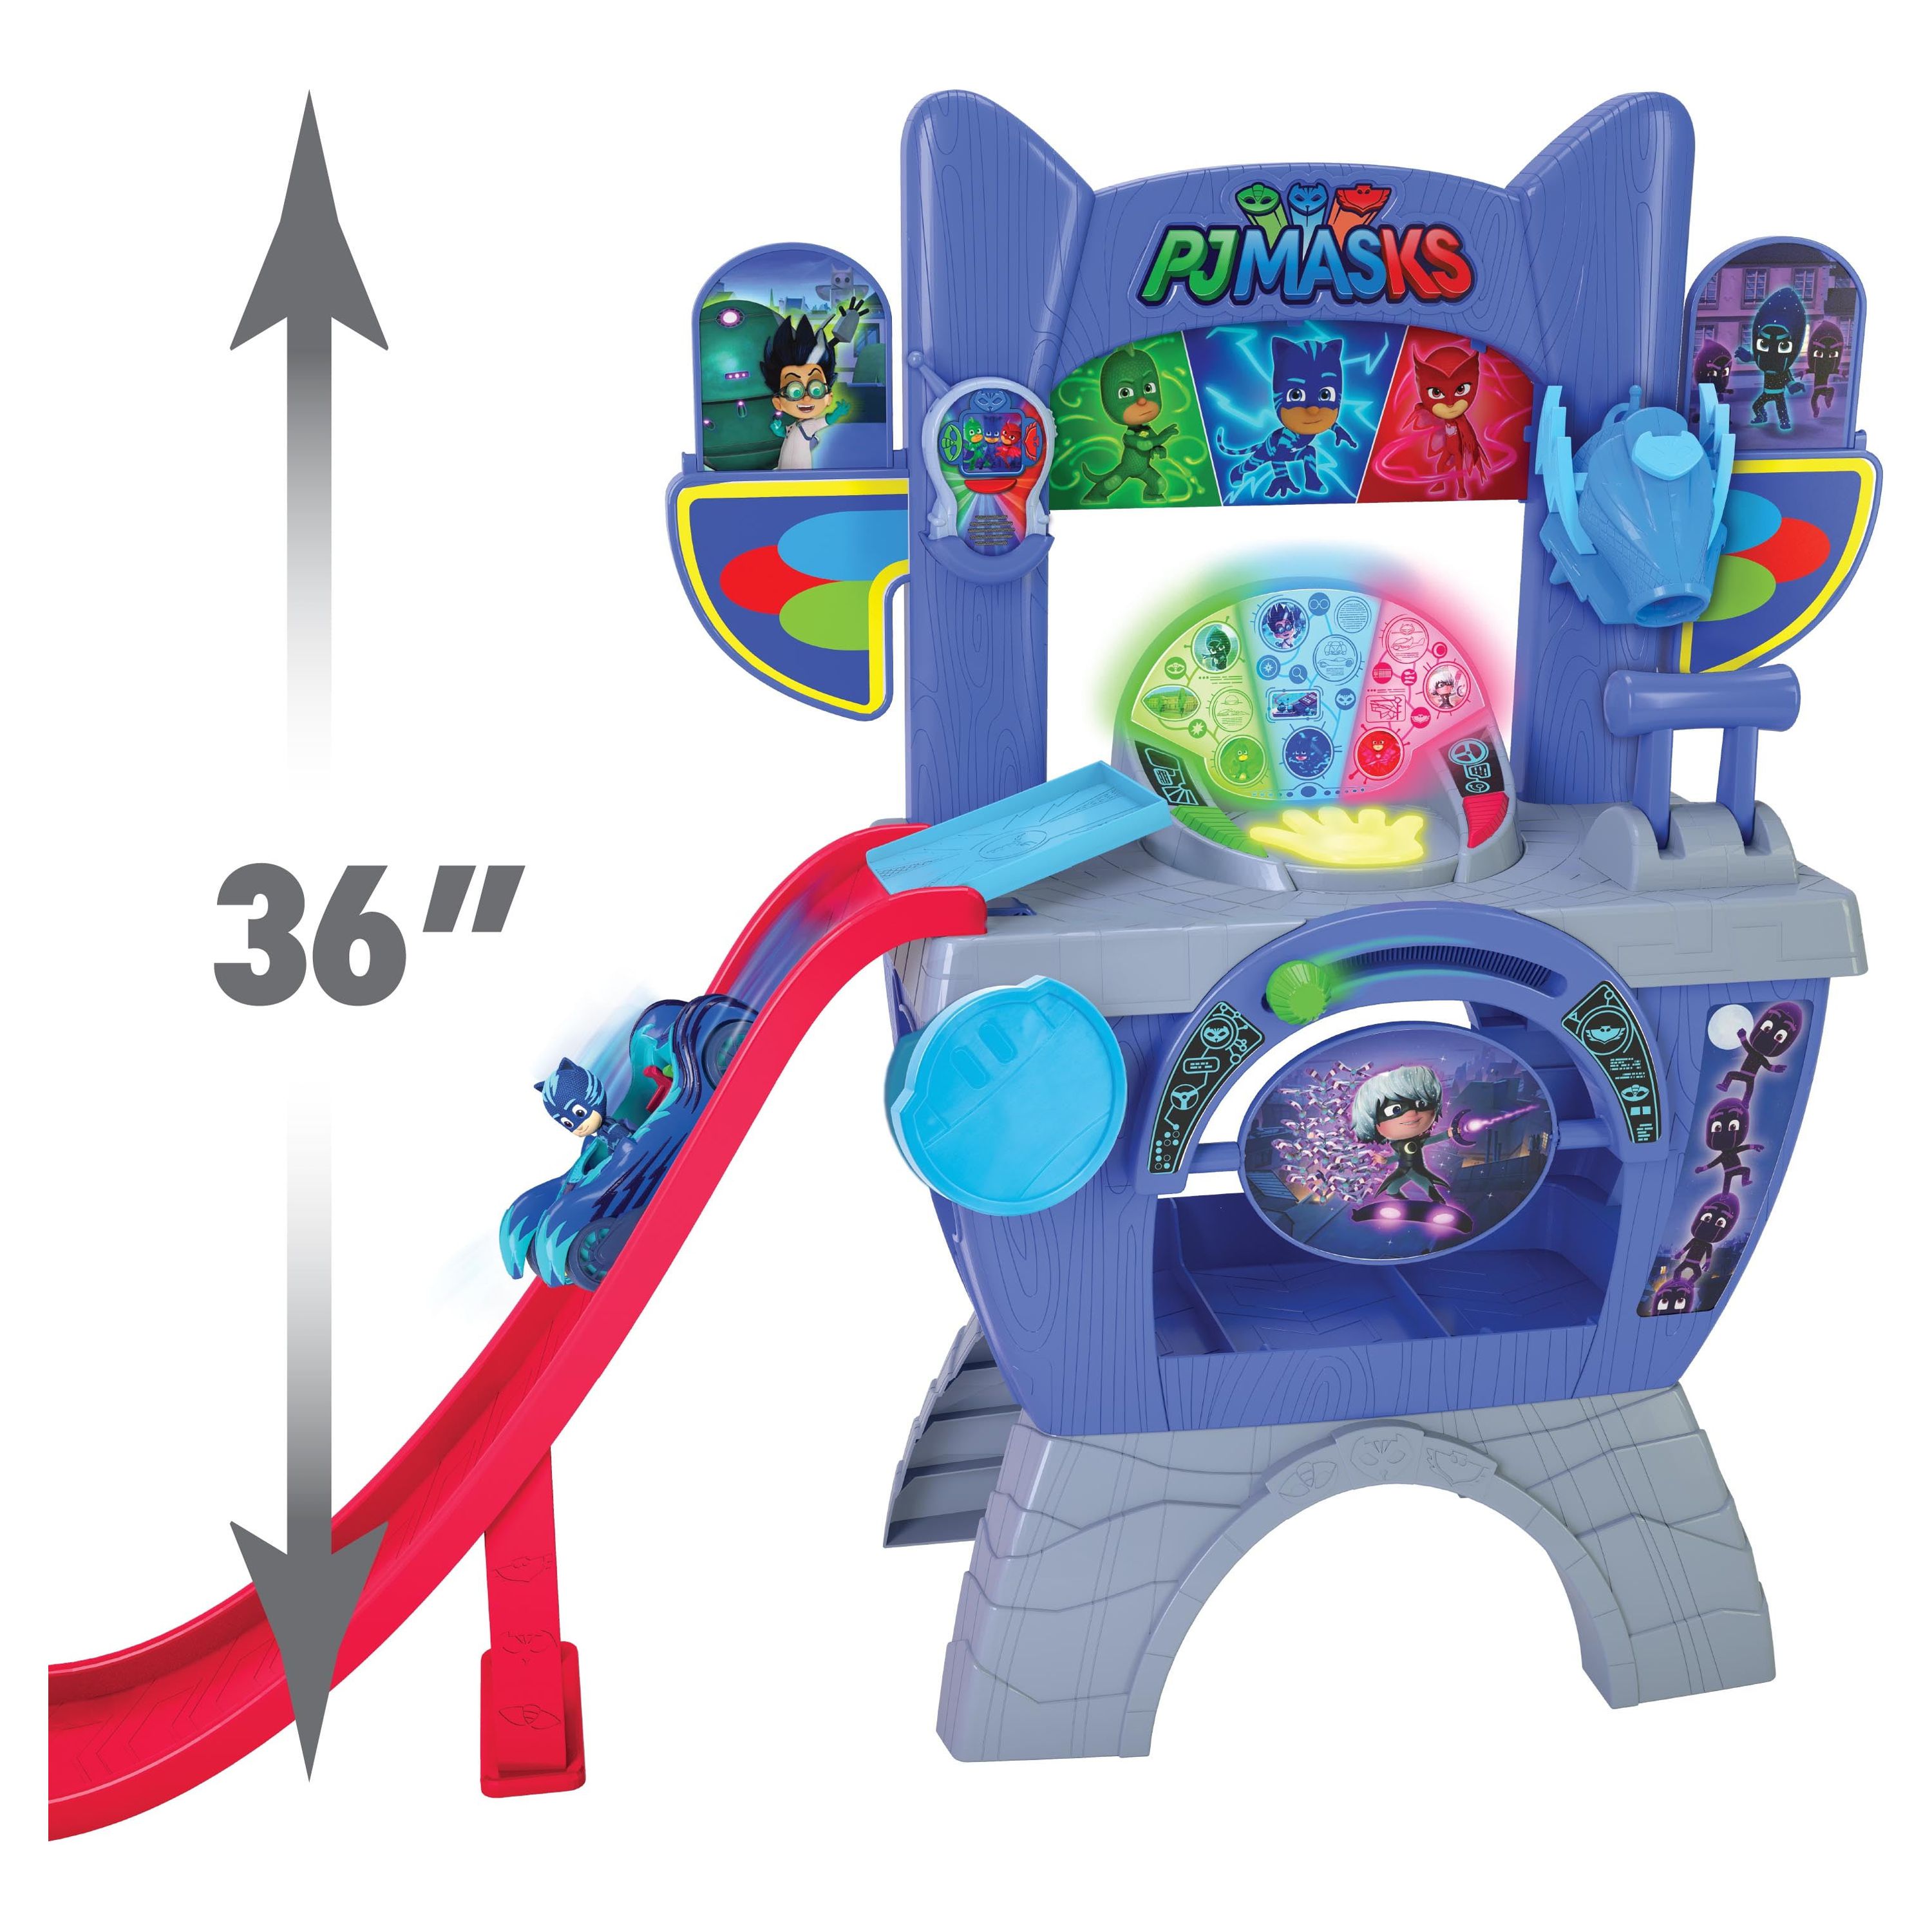 PJ Masks Saves the Day HQ 36-Inch Tall Interactive Playset with Lights and Sounds,  Kids Toys for Ages 3 Up, Gifts and Presents - image 5 of 9